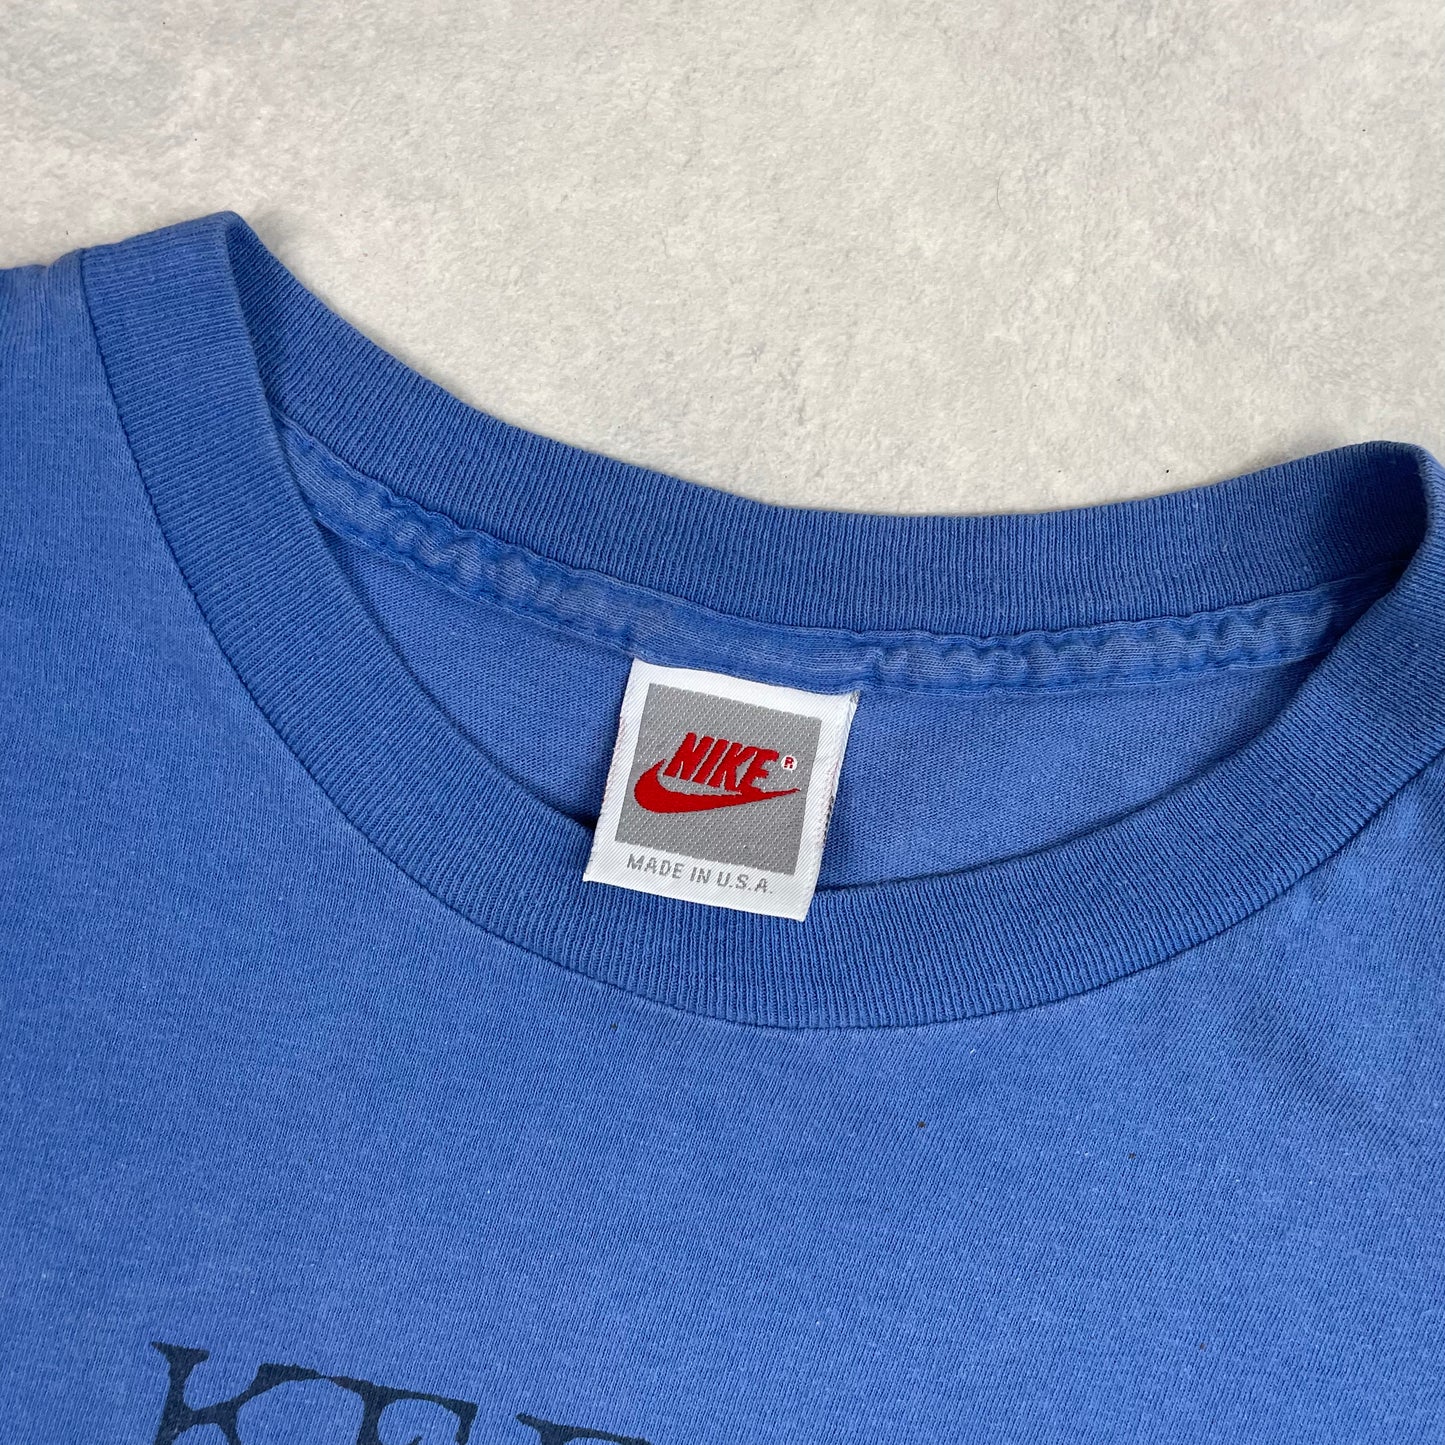 90’s Vintage Nike Single Stitch T-Shirt “Keep Shootin’ Bricks And This Is Gonna Be An Indoor Court” Made in USA